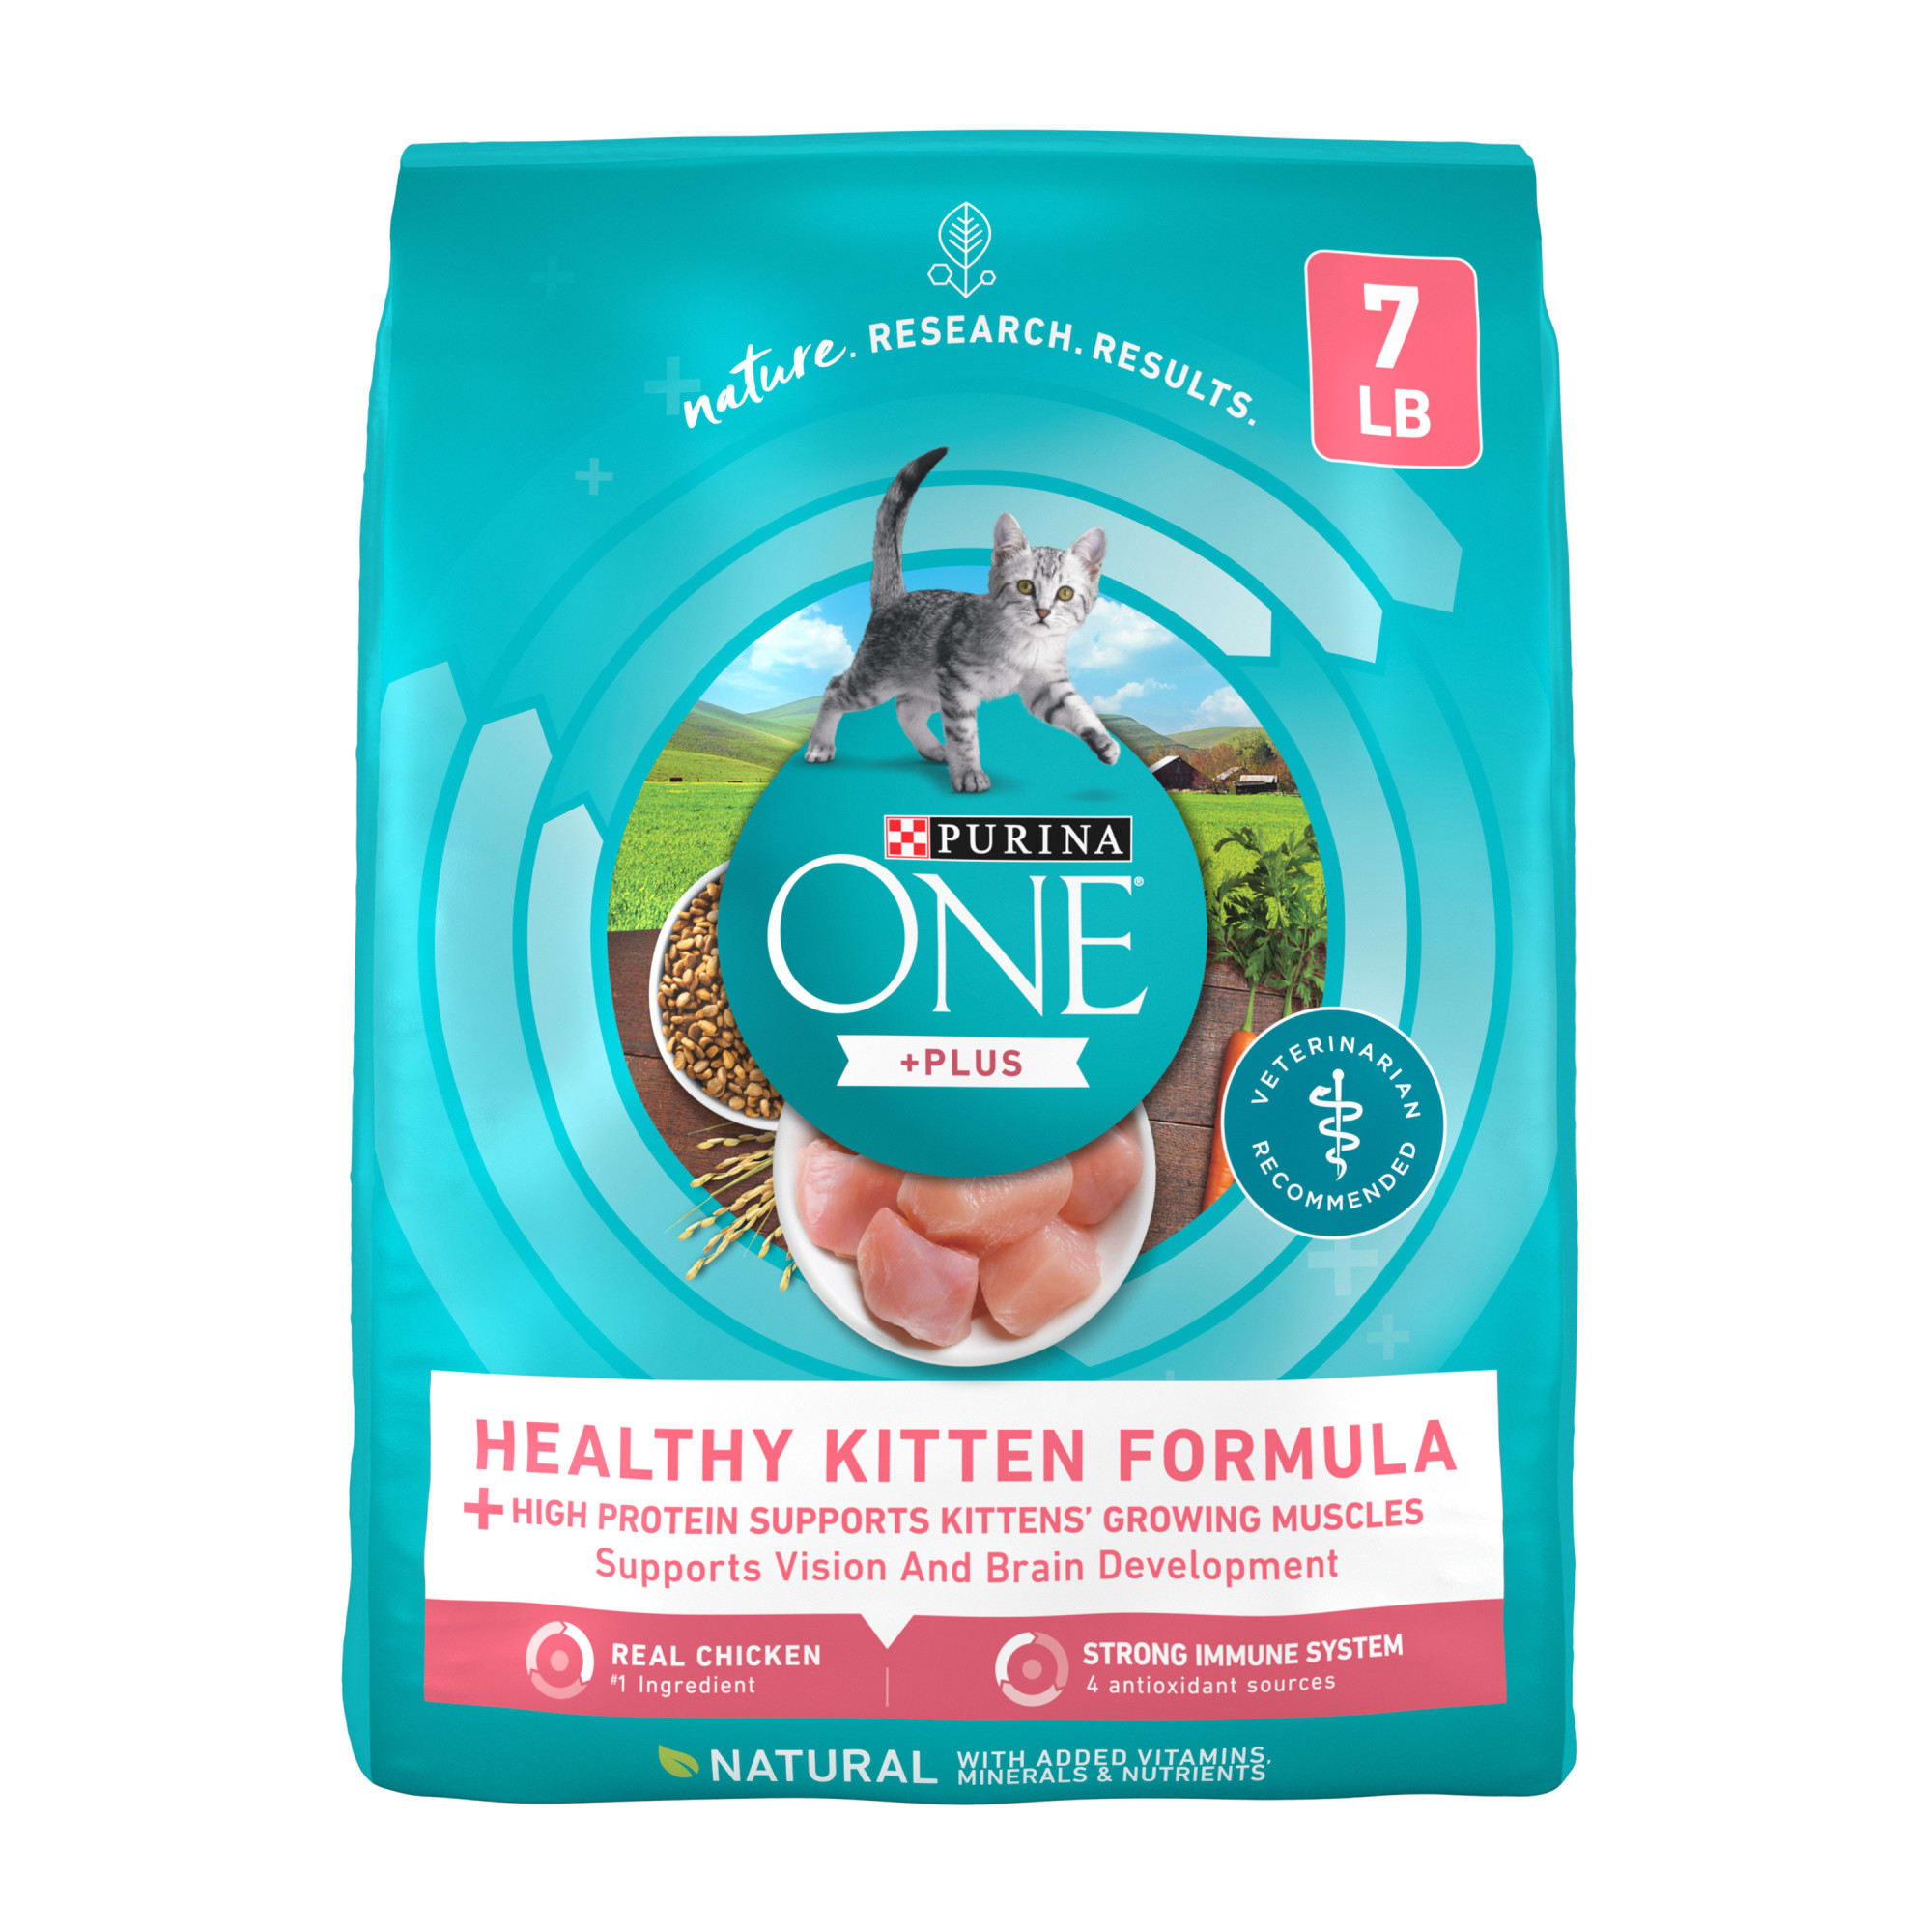 UPC 017800029650 product image for Purina ONE Healthy Kitten Formula +Plus High Protein, Natural Dry Food, 7 lbs. | upcitemdb.com